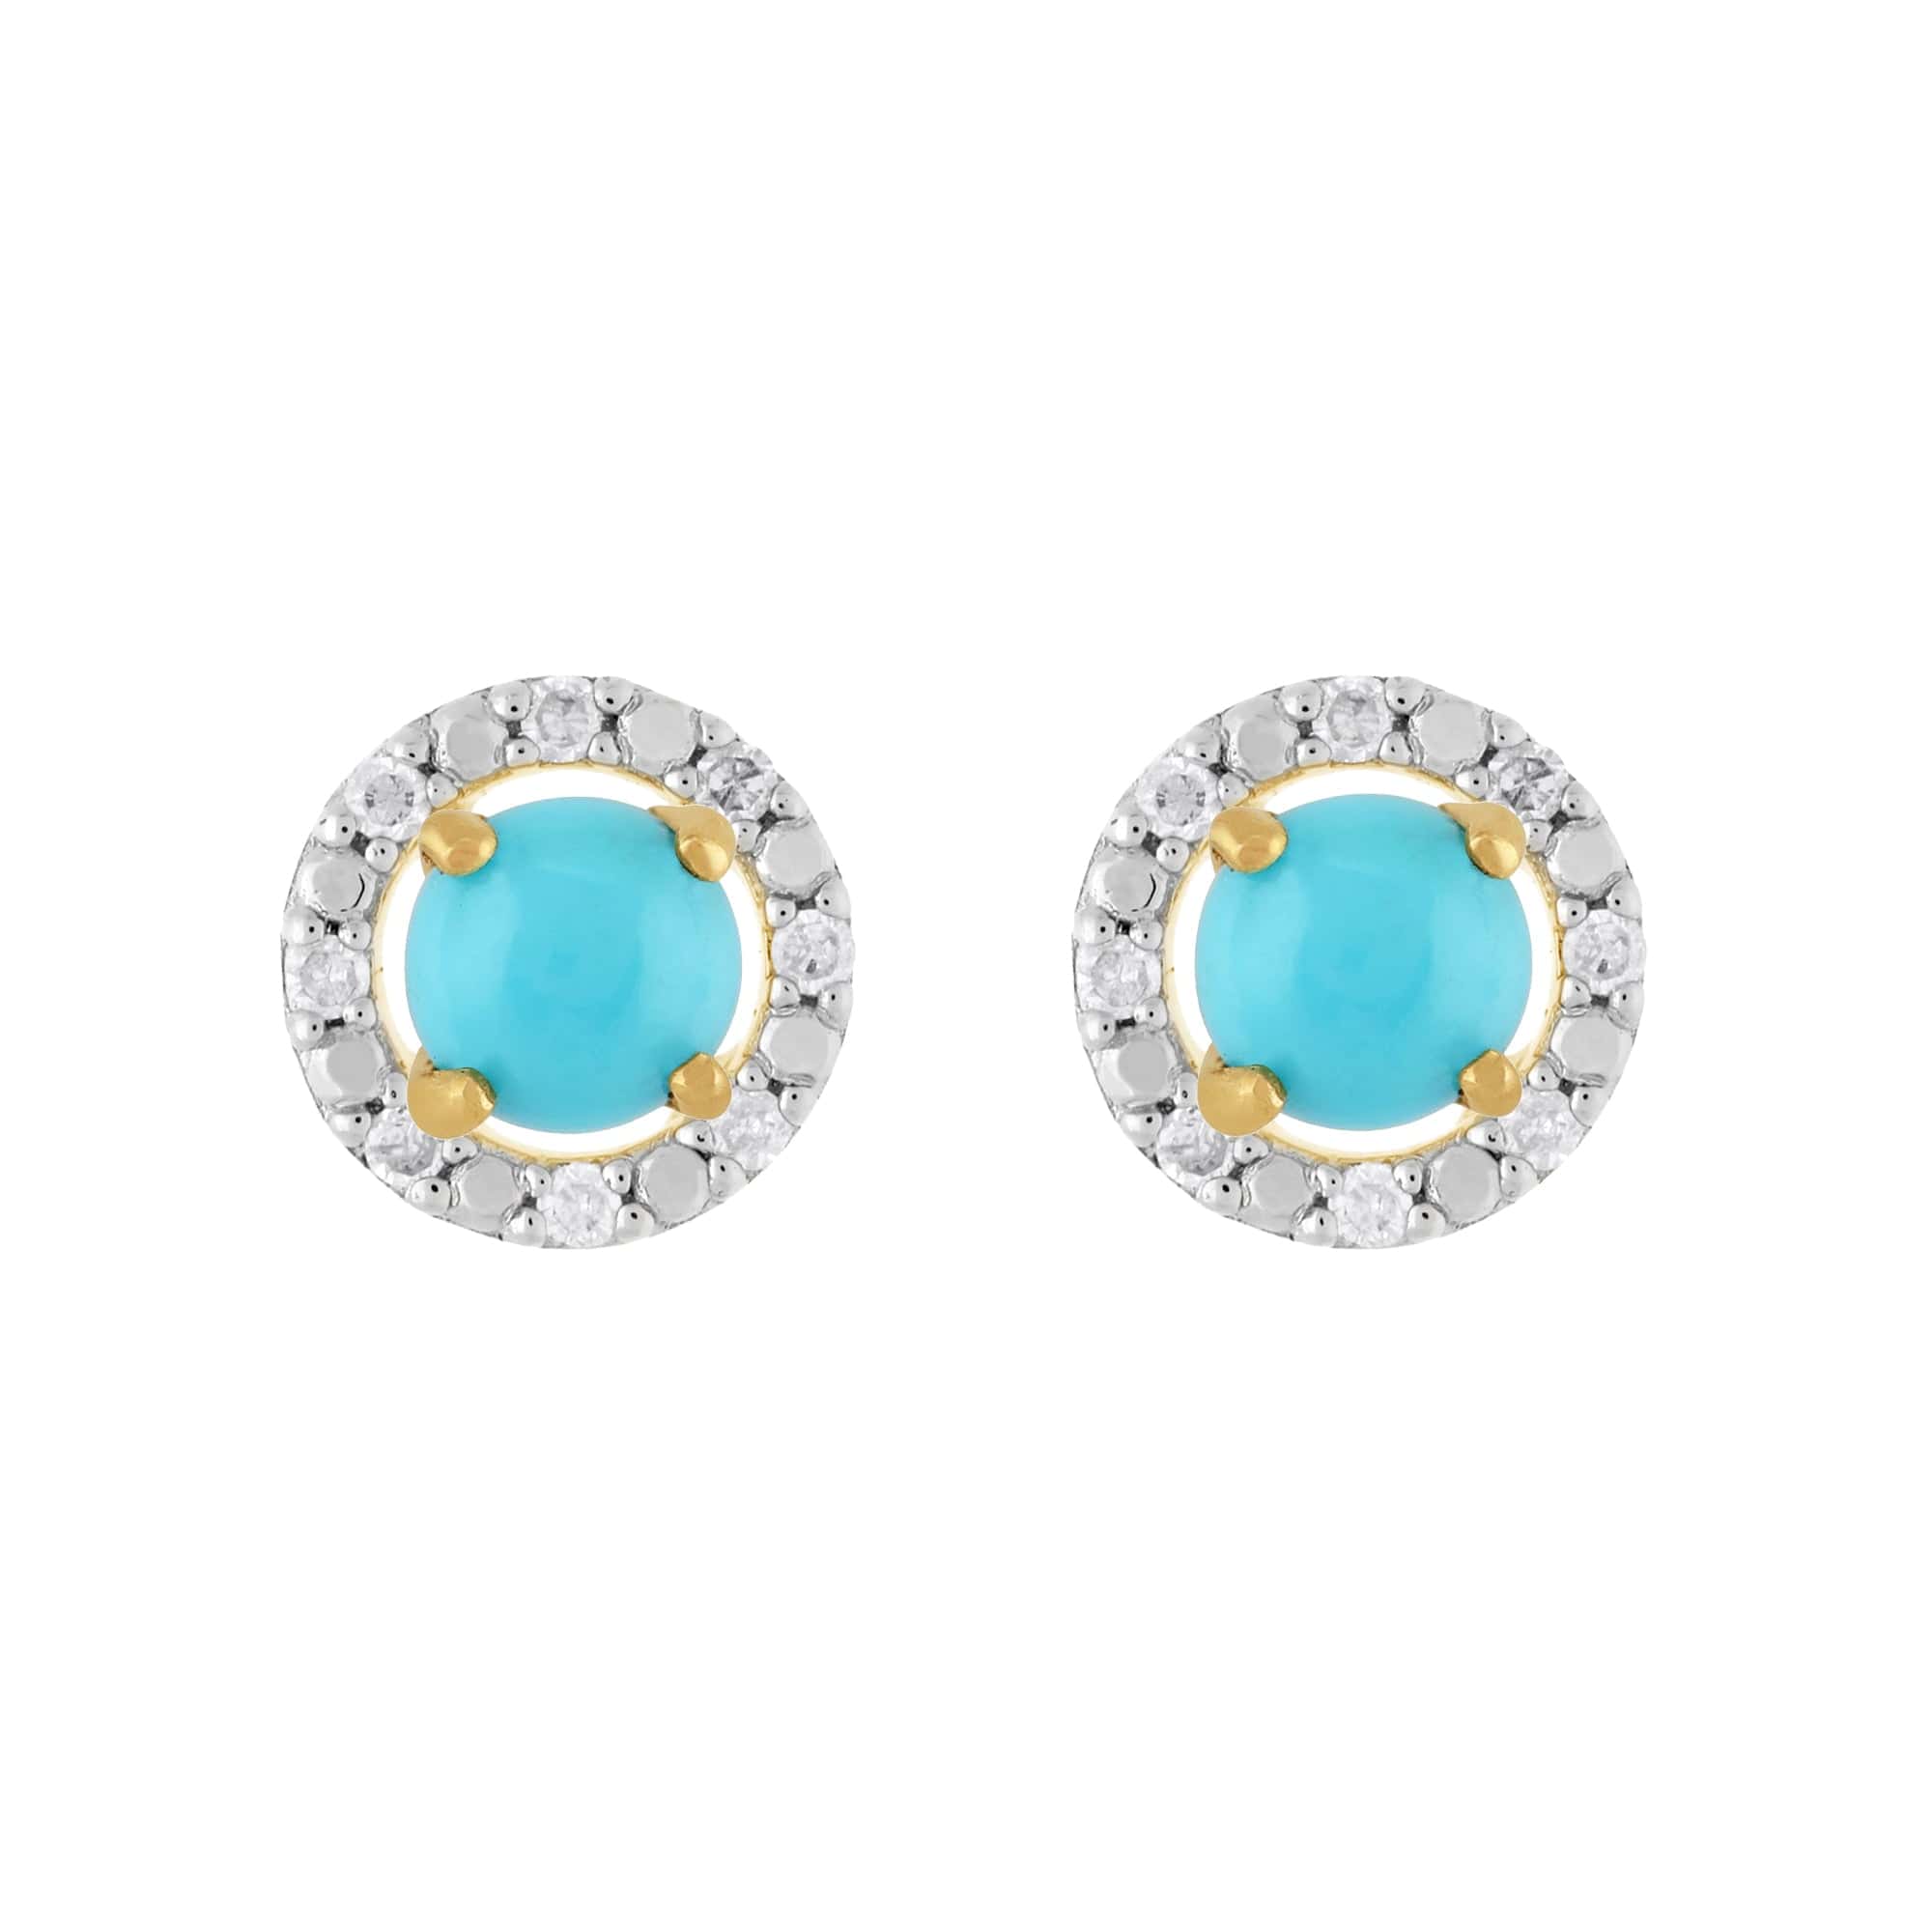 26945-191E0376019 Classic Round Turquoise Stud Earrings with Detachable Diamond Round Earrings Jacket Set in 9ct Yellow Gold 1